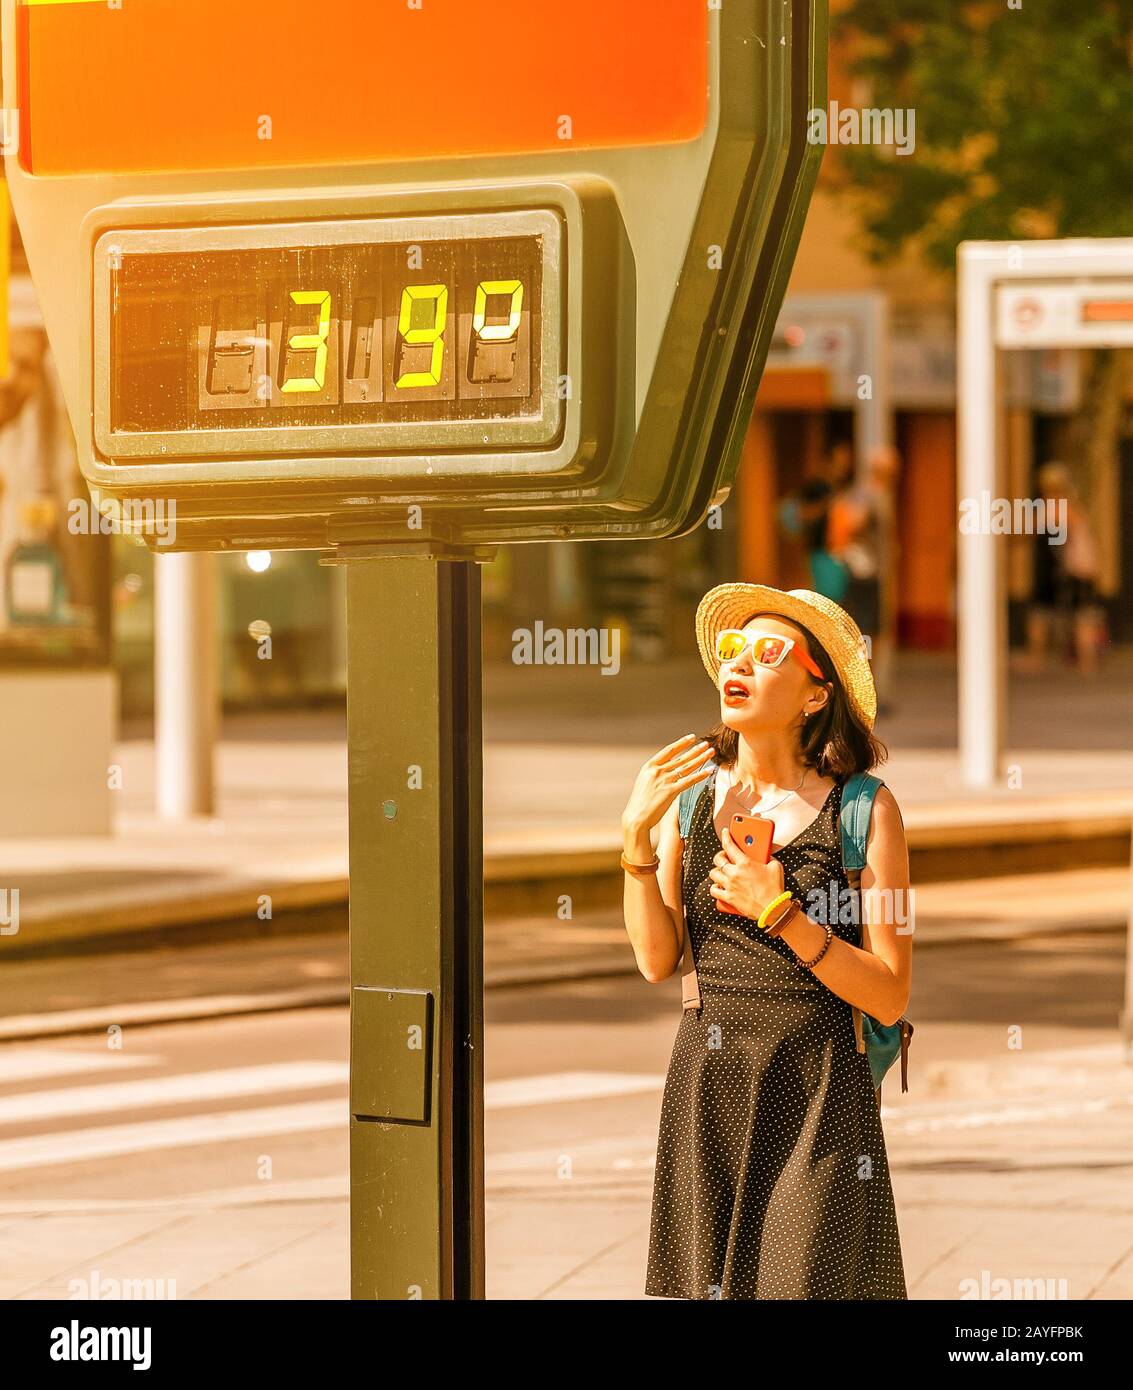 Woman suffers from heat and sunstroke outside in hot weather on the background of a street thermometer showing 39 degrees Celsius Stock Photo